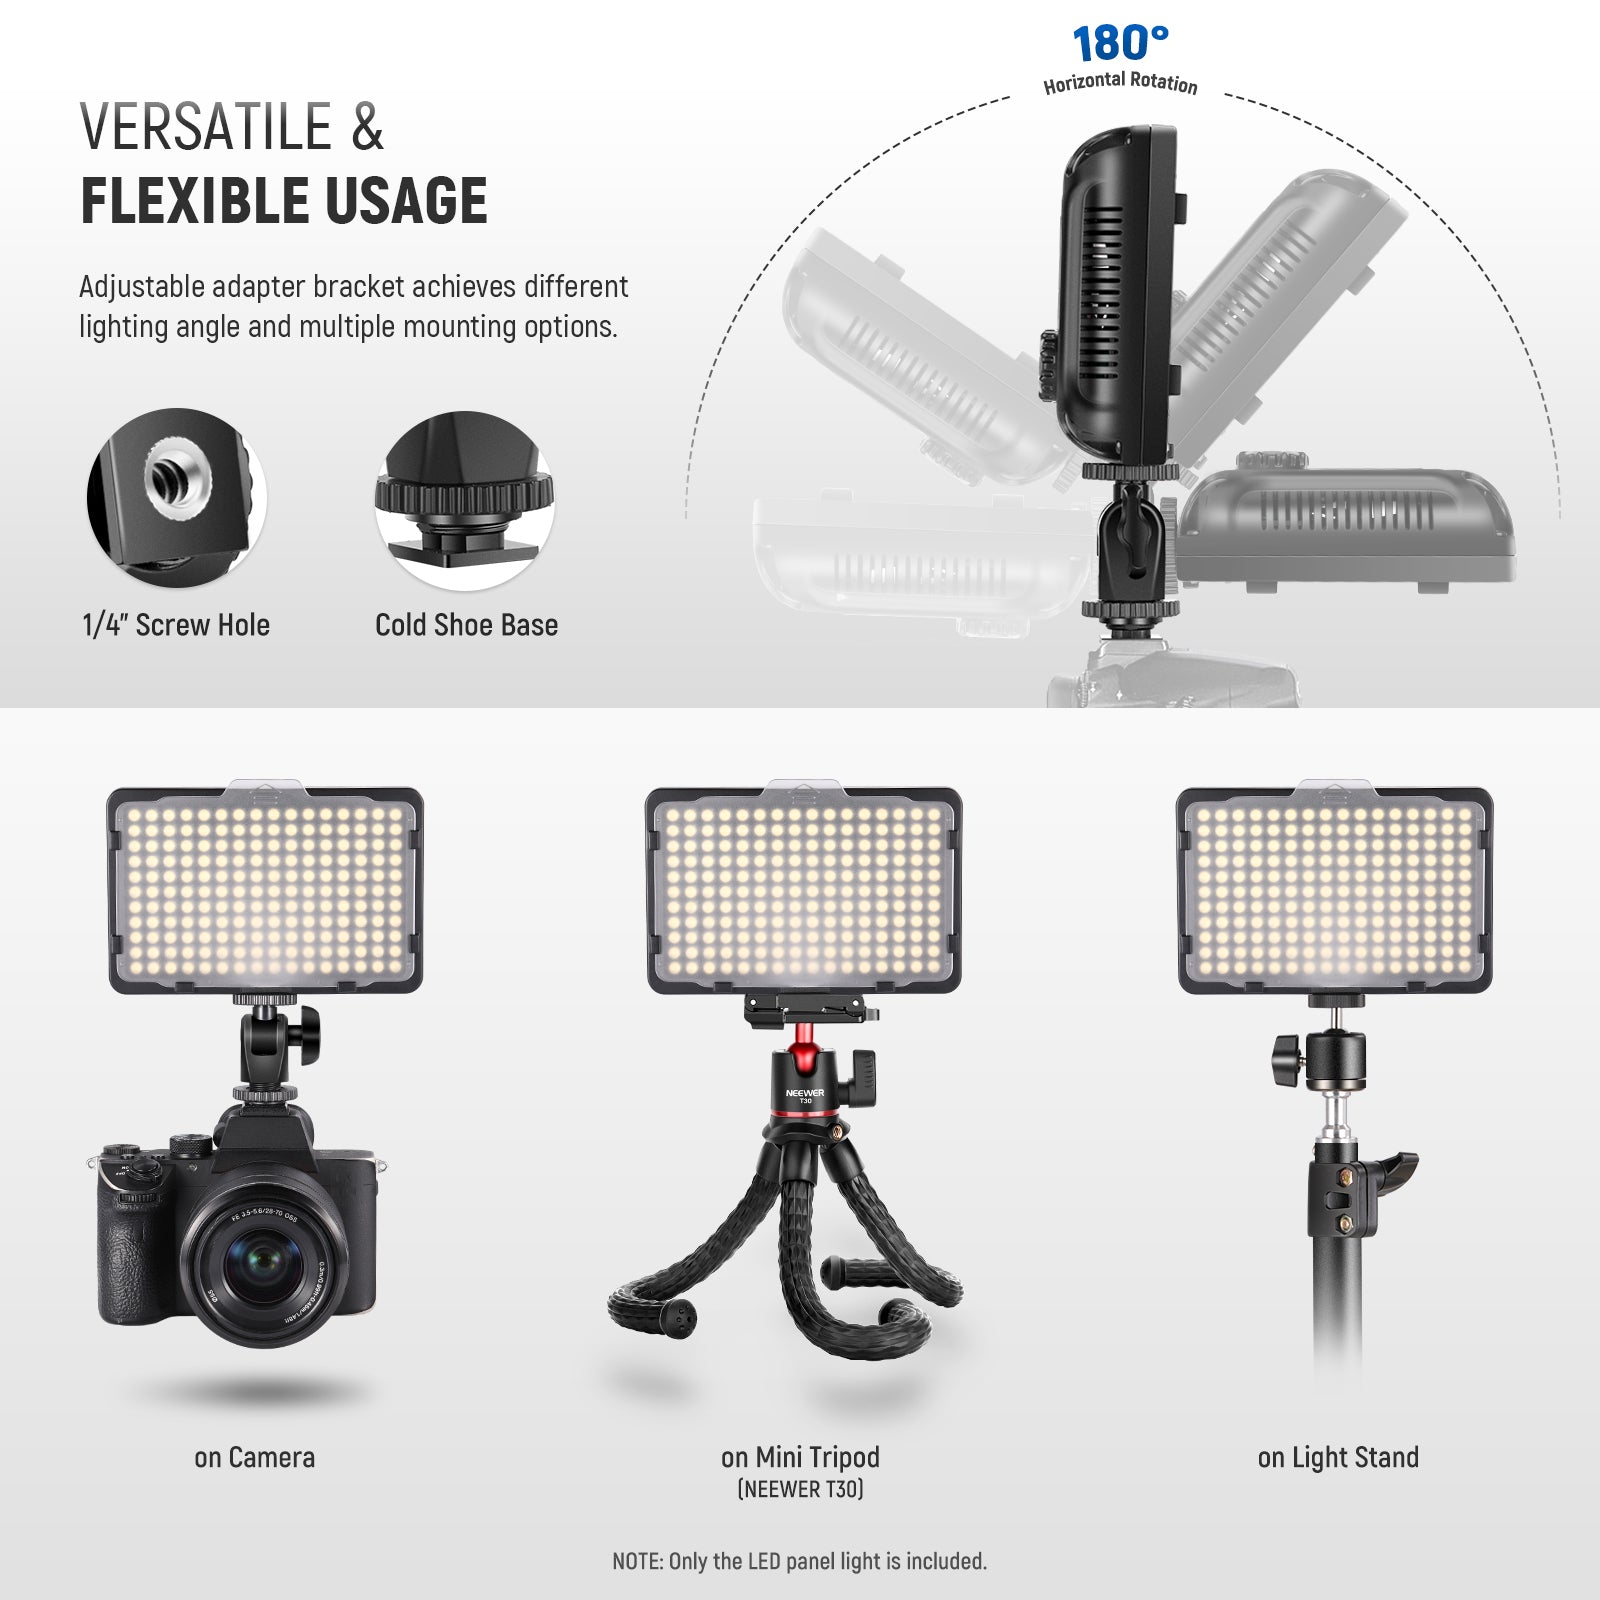 Neewer LED Video Light: A great addition to my camera bag